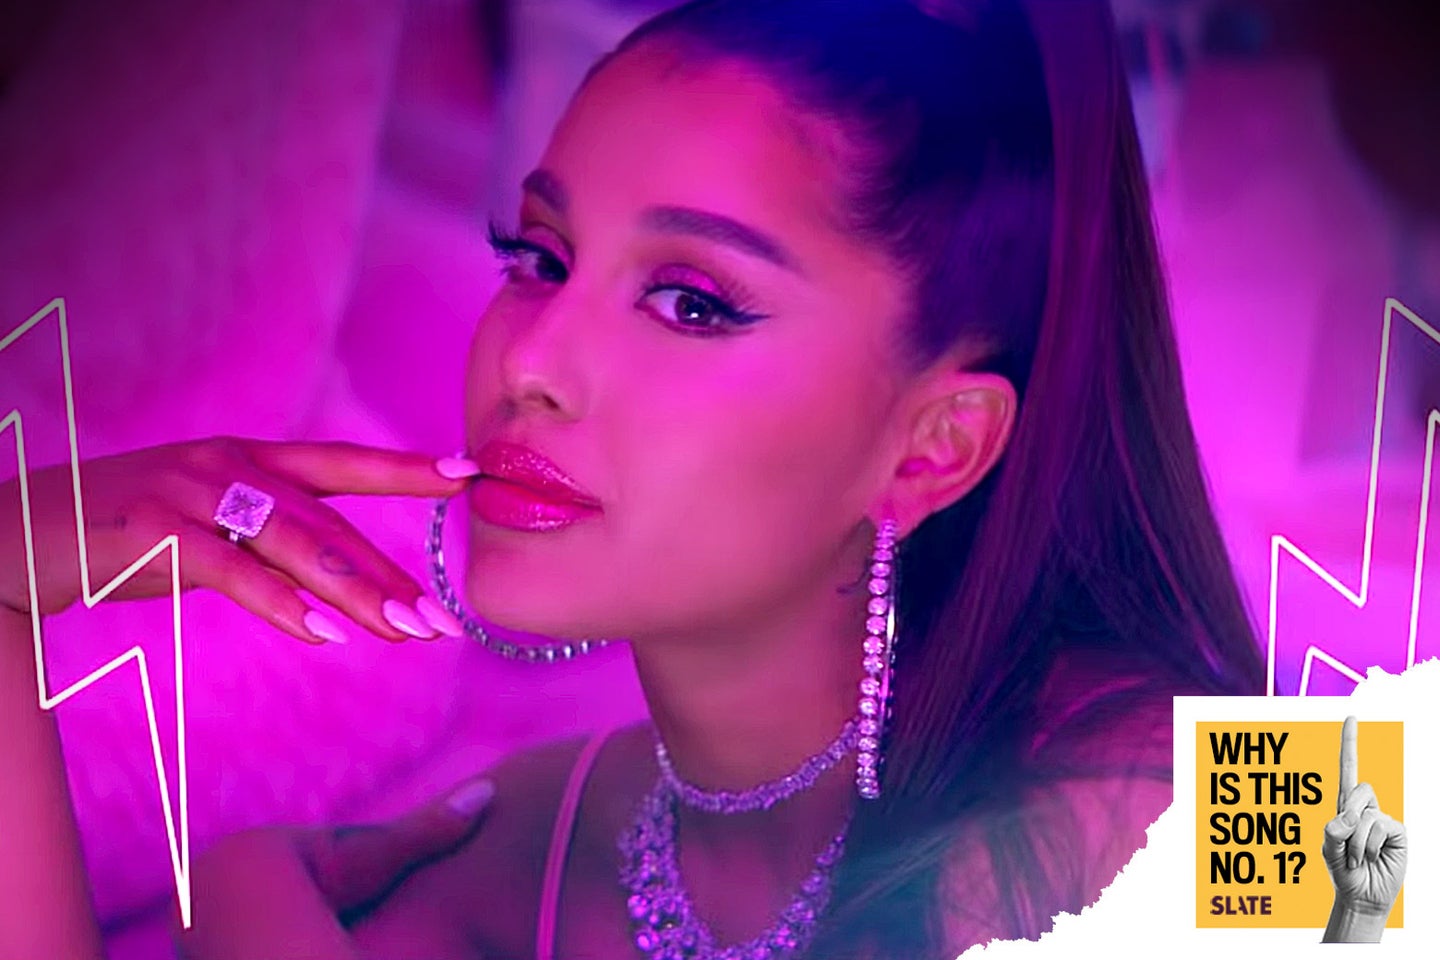 Ariana Grande’s “7 Rings” is No. 1. Why the “cultural appropriation bop ...